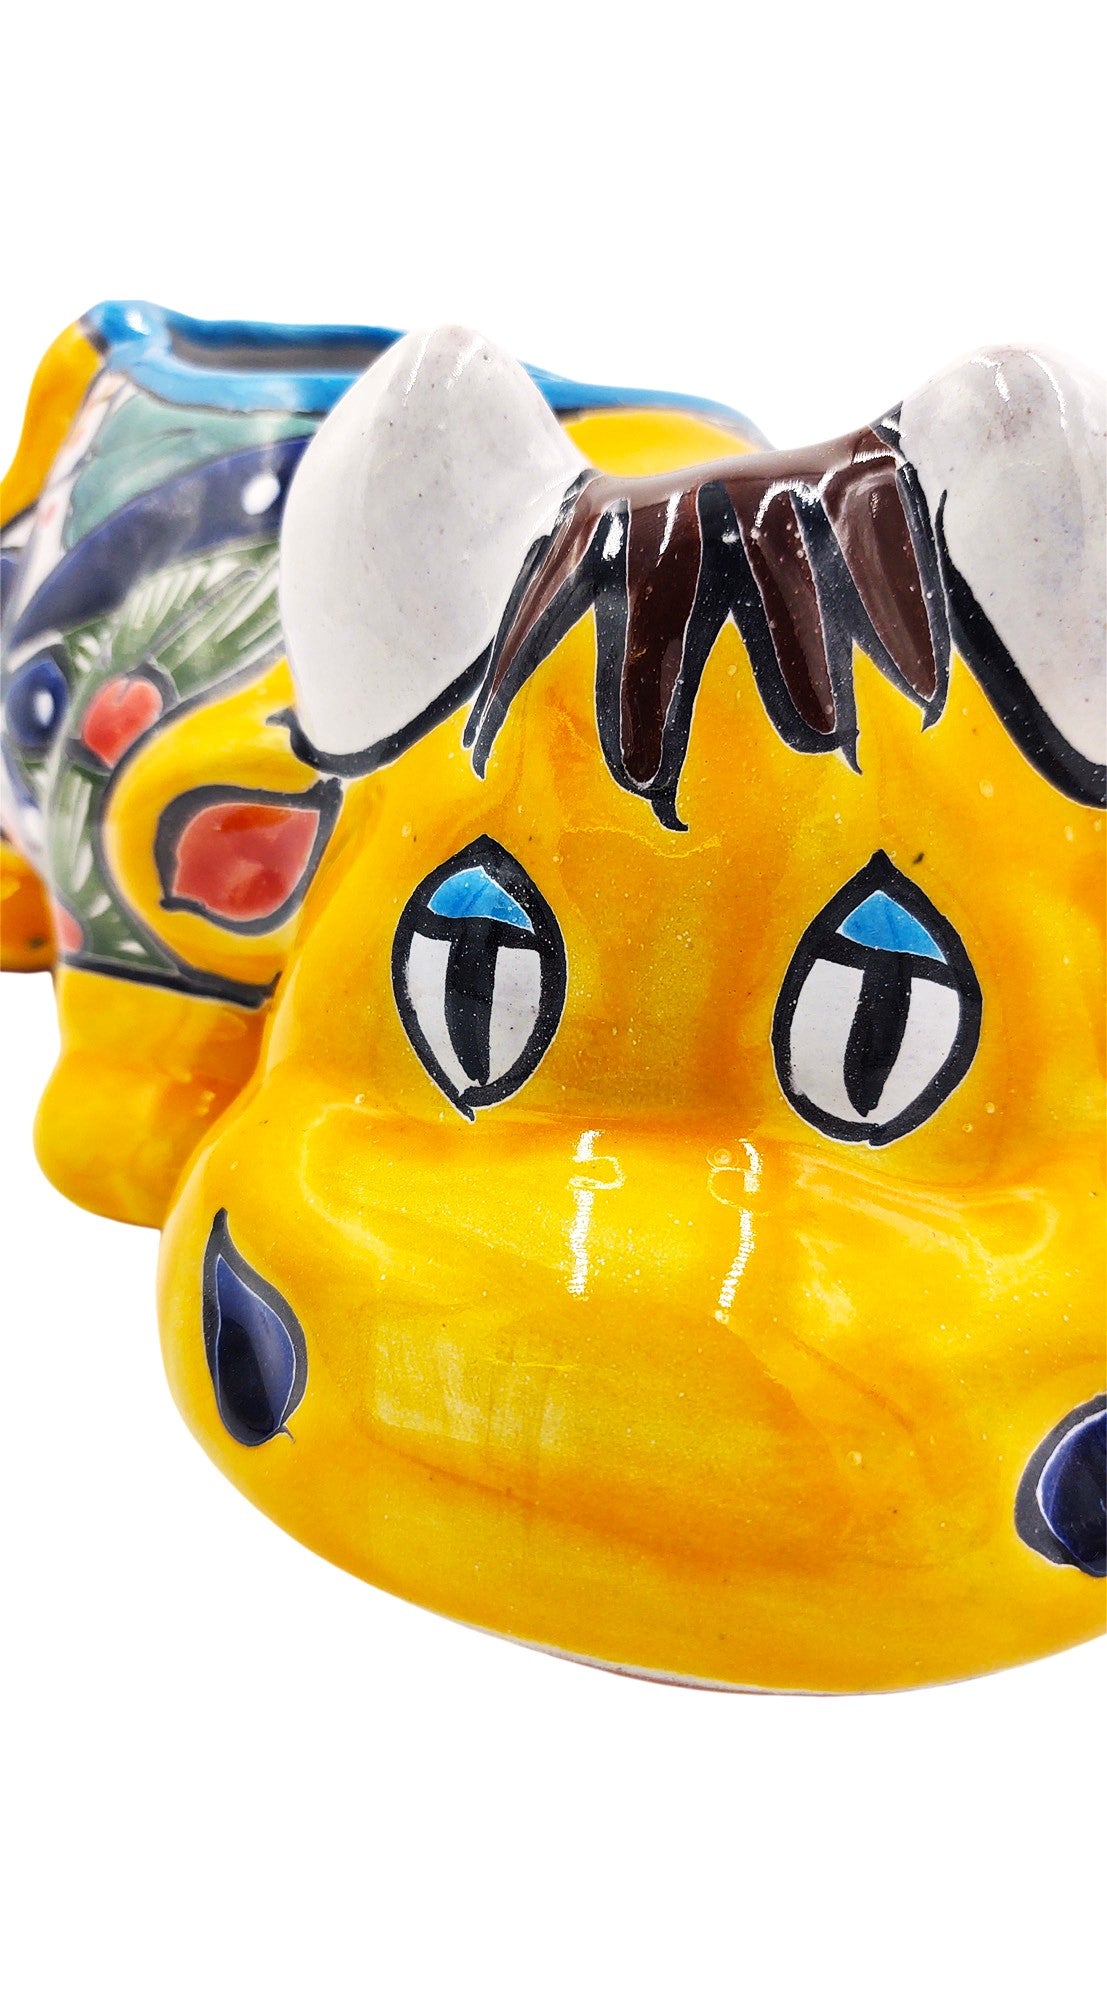 Mexican Talavera Resting Cow Planter Pot Hand Painted - Yellow Body Color